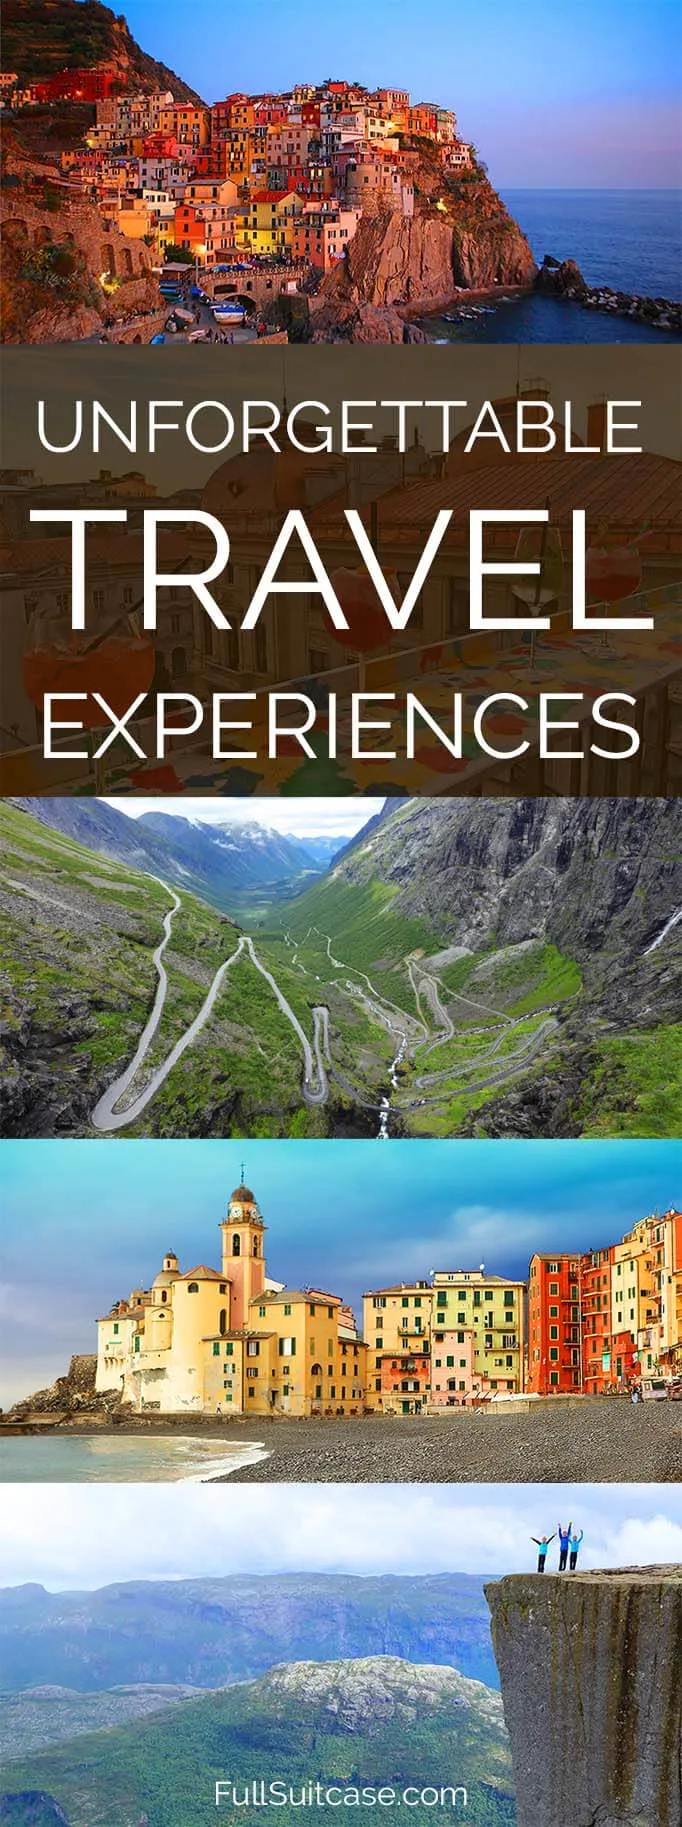 Unforgettable travel experiences - best of the year in travel